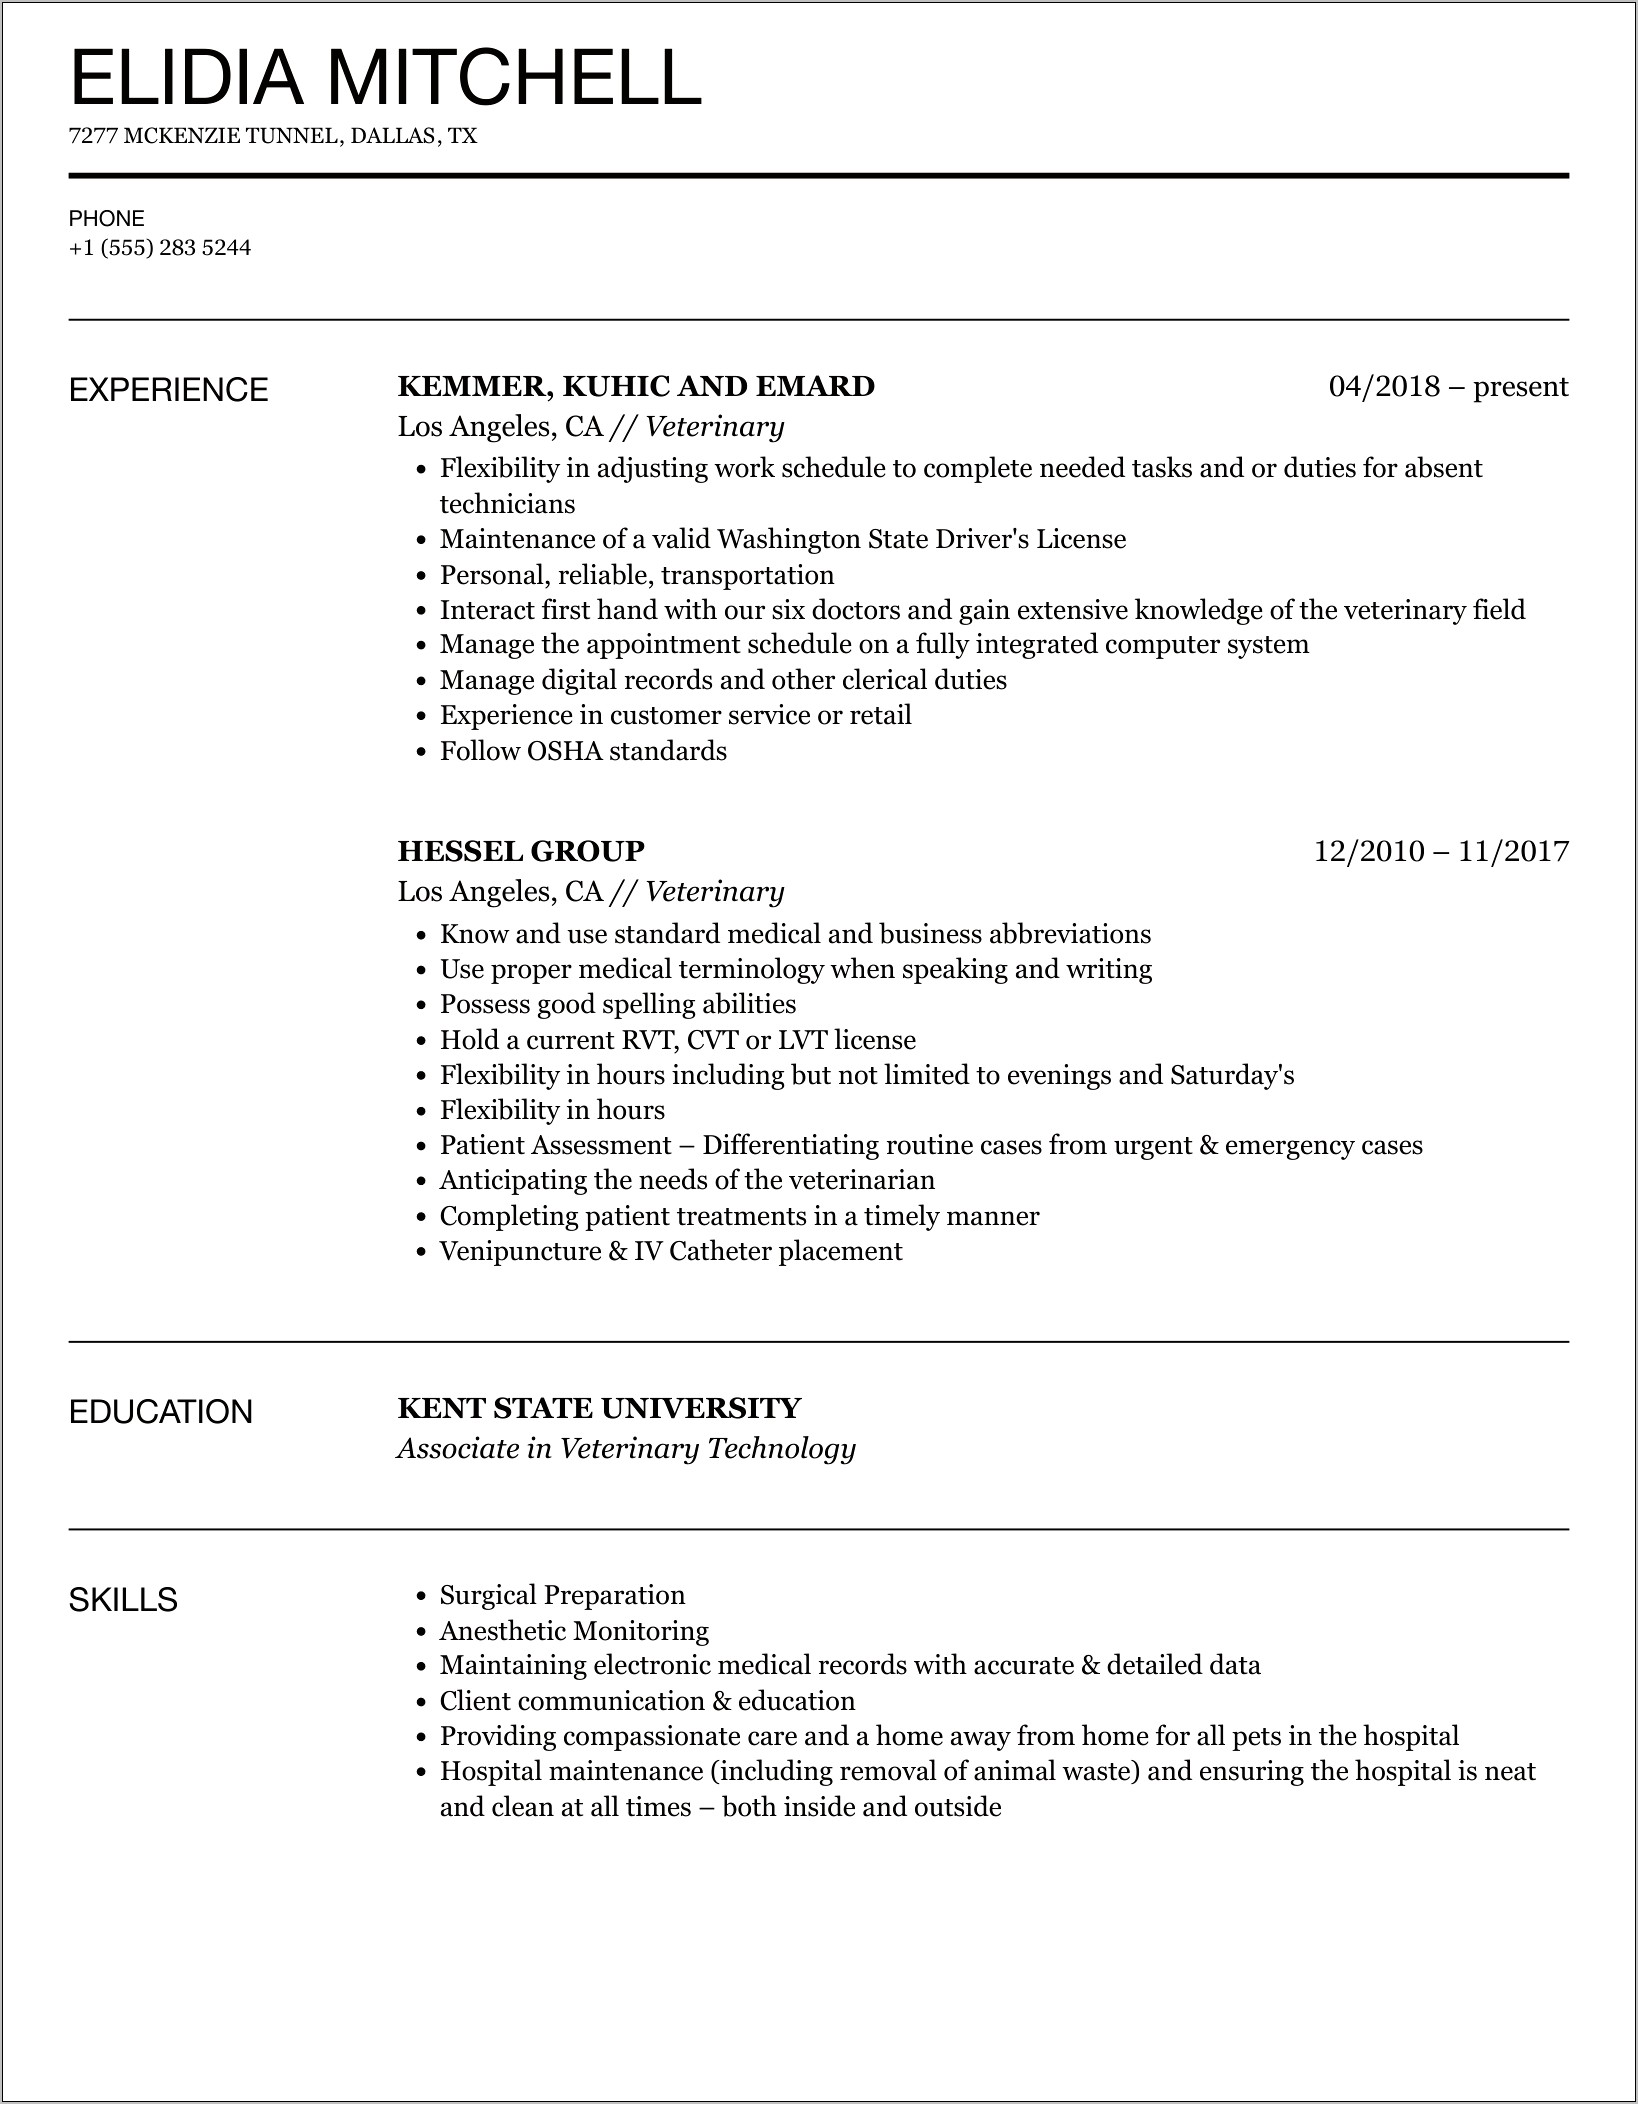 Resume Objective Statements For Veterinary